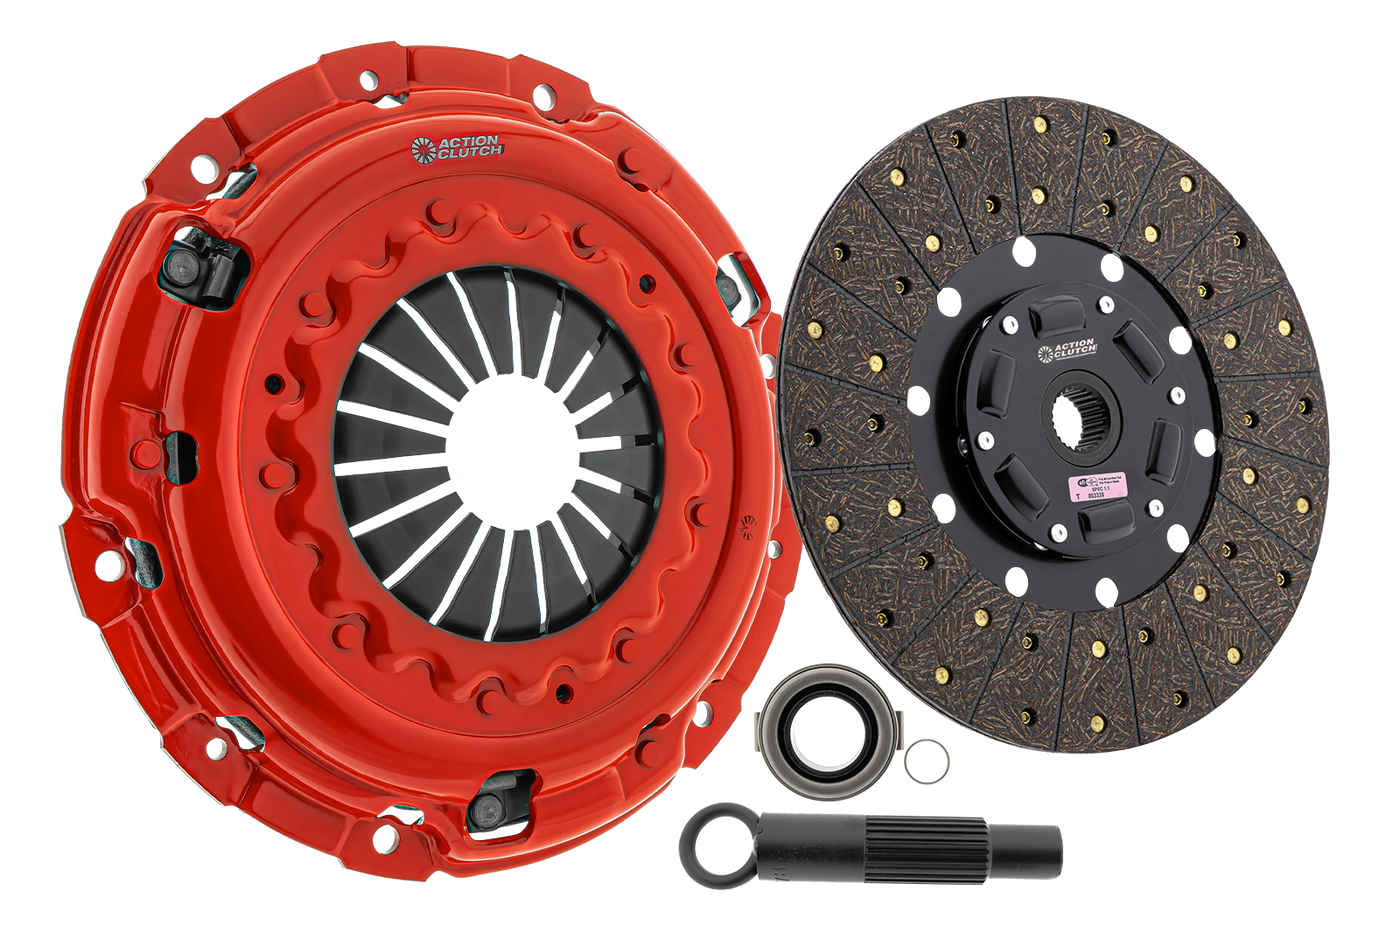 Stage 1 Clutch Kit (1OS) for Acura CL 2003 3.2L (J32)